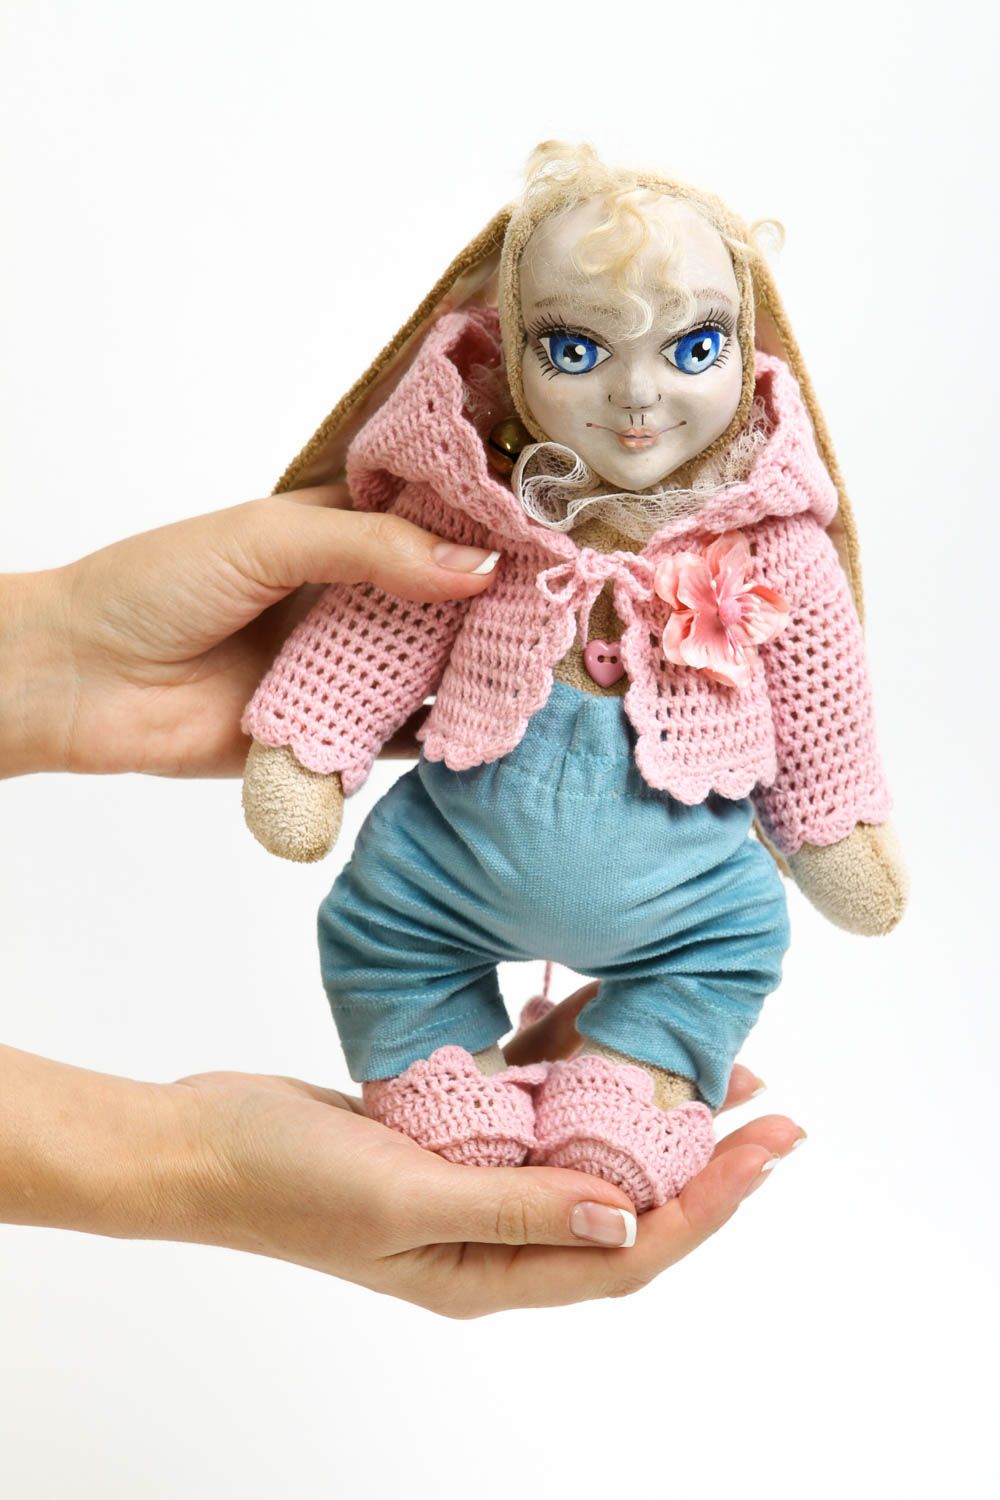 Handmade soft doll designer toys collectible doll home decor unique gifts photo 5